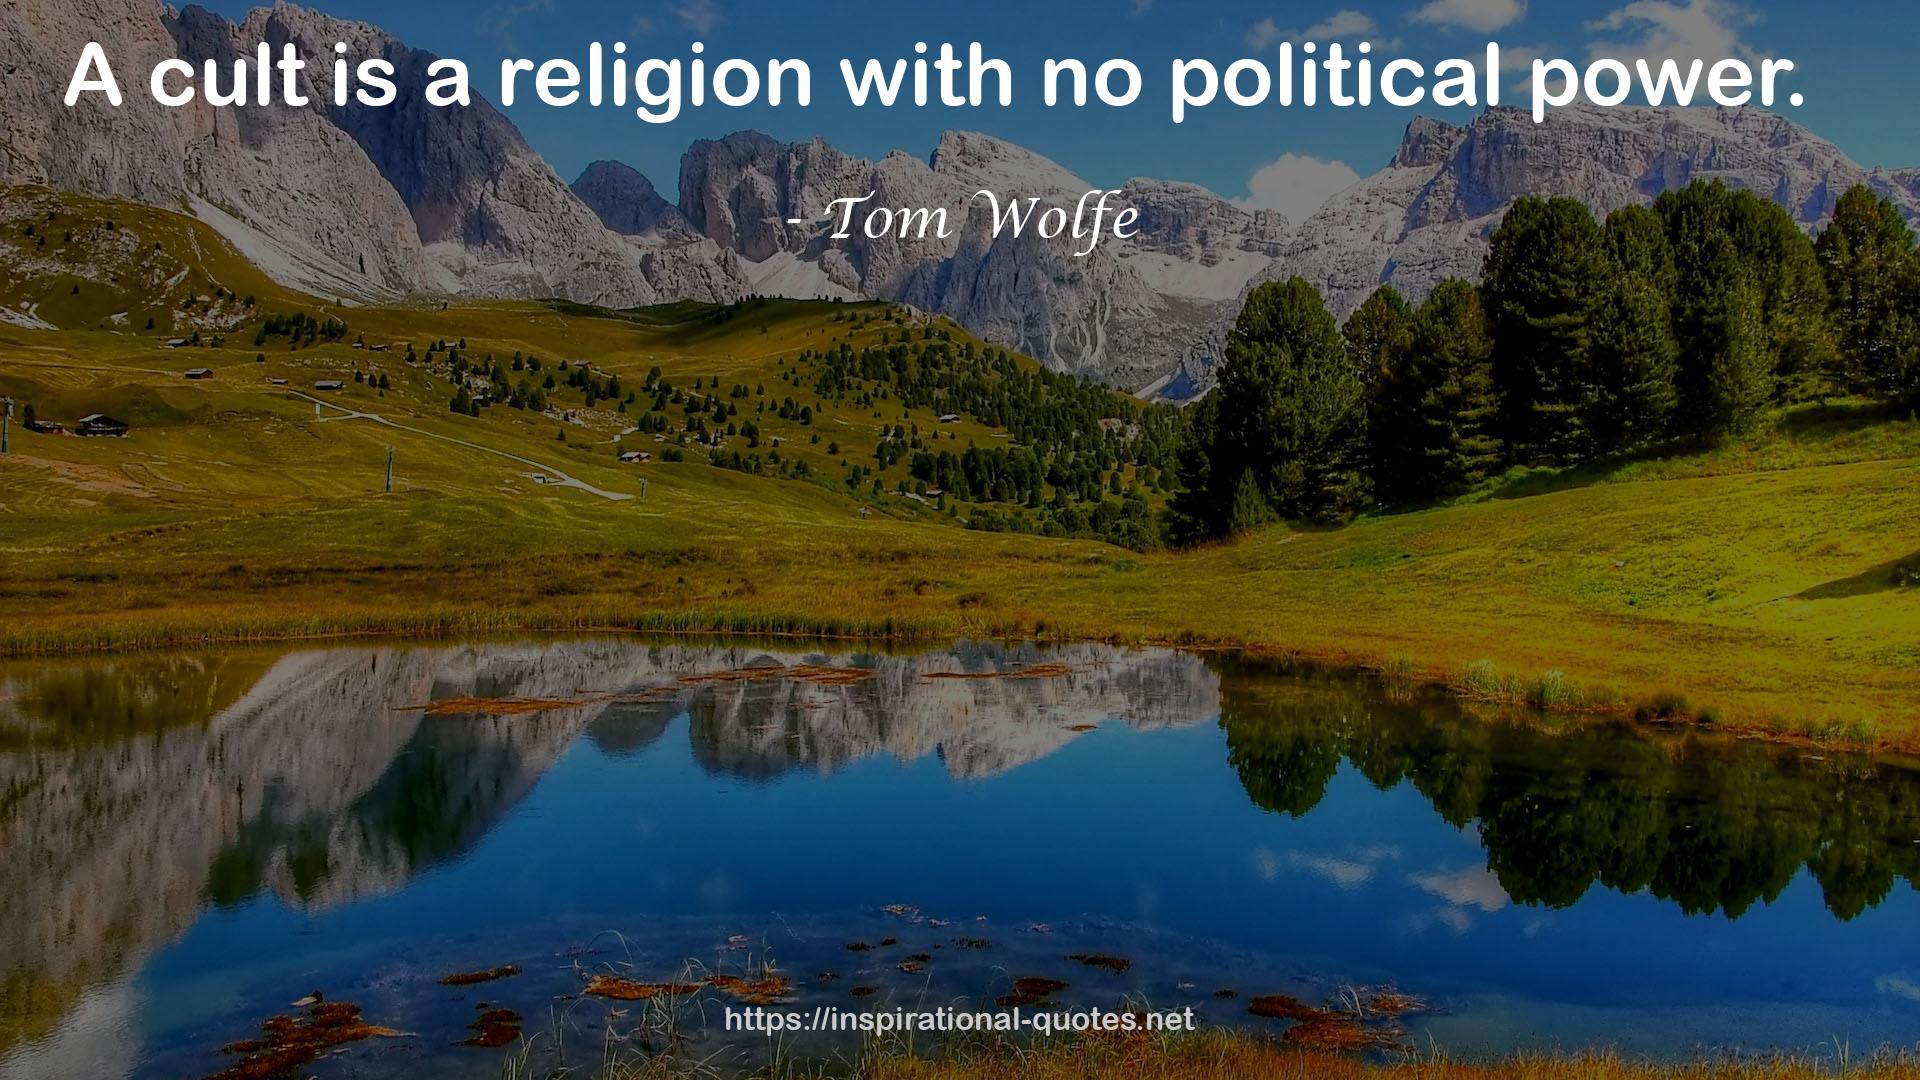 Tom Wolfe QUOTES